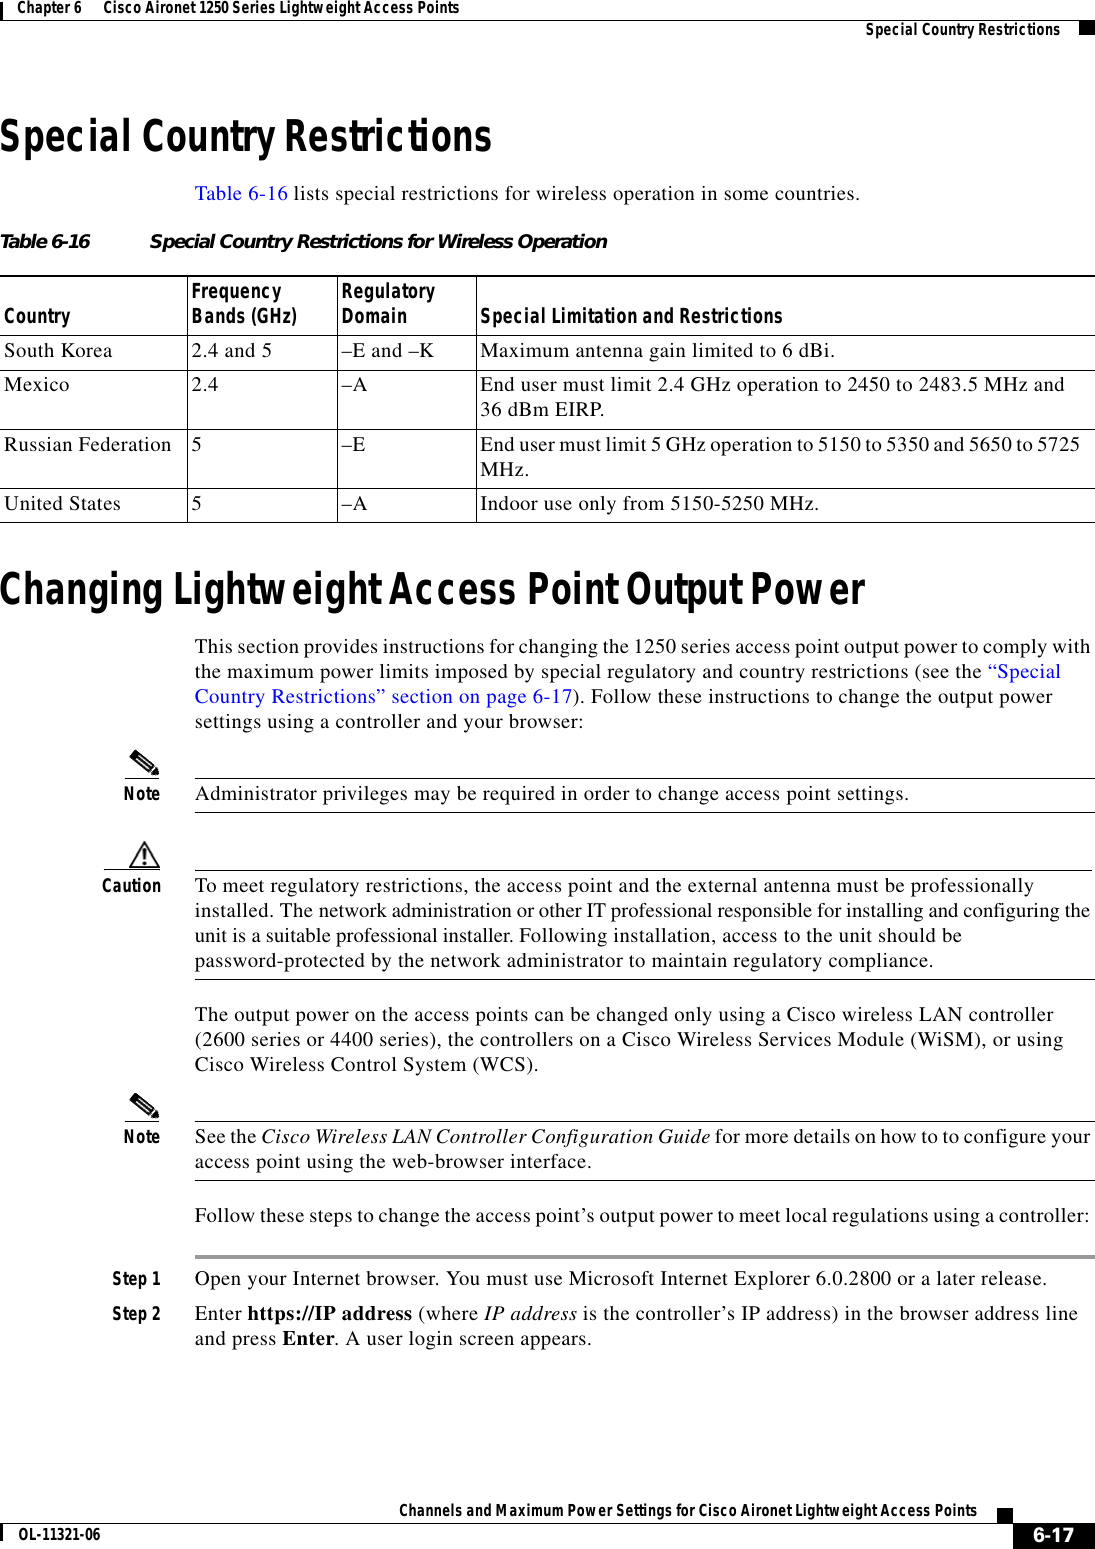  6-17Channels and Maximum Power Settings for Cisco Aironet Lightweight Access PointsOL-11321-06Chapter 6      Cisco Aironet 1250 Series Lightweight Access Points   Special Country RestrictionsSpecial Country RestrictionsTable 6-16 lists special restrictions for wireless operation in some countries. Changing Lightweight Access Point Output PowerThis section provides instructions for changing the 1250 series access point output power to comply with the maximum power limits imposed by special regulatory and country restrictions (see the “Special Country Restrictions” section on page 6-17). Follow these instructions to change the output power settings using a controller and your browser:Note Administrator privileges may be required in order to change access point settings.Caution To meet regulatory restrictions, the access point and the external antenna must be professionally installed. The network administration or other IT professional responsible for installing and configuring the unit is a suitable professional installer. Following installation, access to the unit should be  password-protected by the network administrator to maintain regulatory compliance.The output power on the access points can be changed only using a Cisco wireless LAN controller (2600 series or 4400 series), the controllers on a Cisco Wireless Services Module (WiSM), or using Cisco Wireless Control System (WCS). Note See the Cisco Wireless LAN Controller Configuration Guide for more details on how to to configure your access point using the web-browser interface.Follow these steps to change the access point’s output power to meet local regulations using a controller: Step 1 Open your Internet browser. You must use Microsoft Internet Explorer 6.0.2800 or a later release.Step 2 Enter https://IP address (where IP address is the controller’s IP address) in the browser address line and press Enter. A user login screen appears.Table 6-16 Special Country Restrictions for Wireless OperationCountry Frequency Bands (GHz) Regulatory Domain Special Limitation and RestrictionsSouth Korea 2.4 and 5  –E and –K Maximum antenna gain limited to 6 dBi.Mexico 2.4  –A End user must limit 2.4 GHz operation to 2450 to 2483.5 MHz and  36 dBm EIRP.Russian Federation 5–E End user must limit 5 GHz operation to 5150 to 5350 and 5650 to 5725 MHz.United States 5  –A  Indoor use only from 5150-5250 MHz.